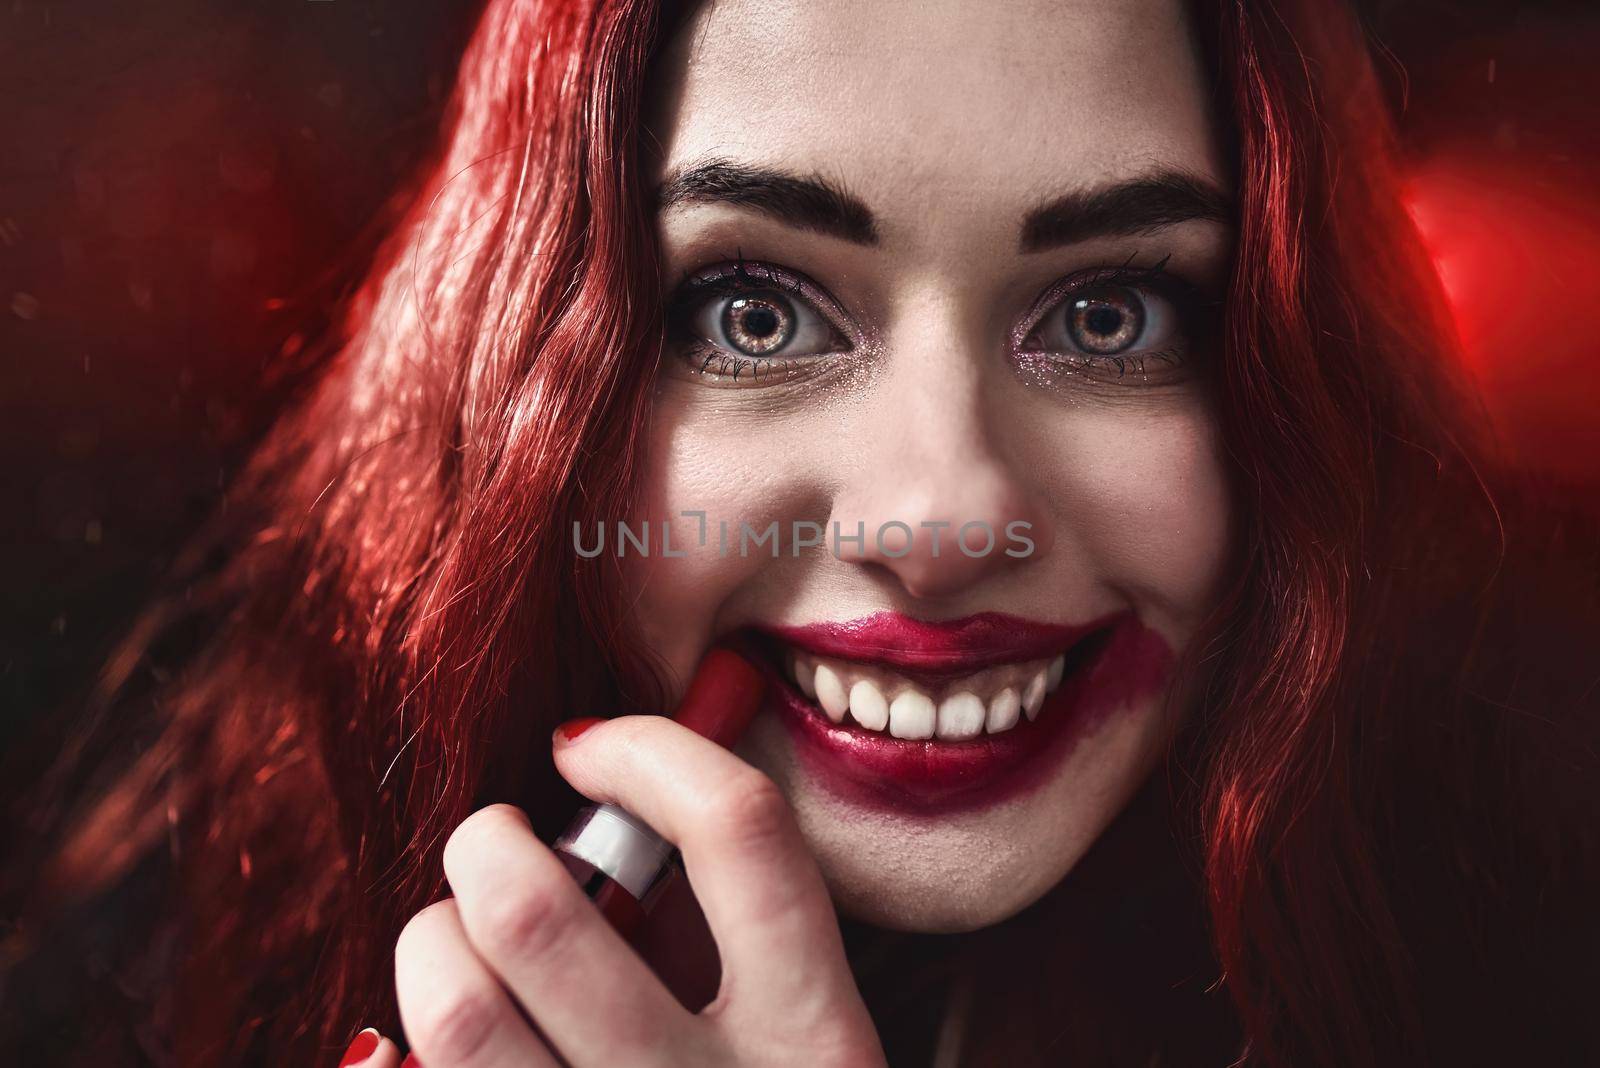 Halloween Time. Portrait of crazy-looking psycho woman with red hair she is smearing red lipstick on her face. horror,Fear and nightmare concept by Nickstock